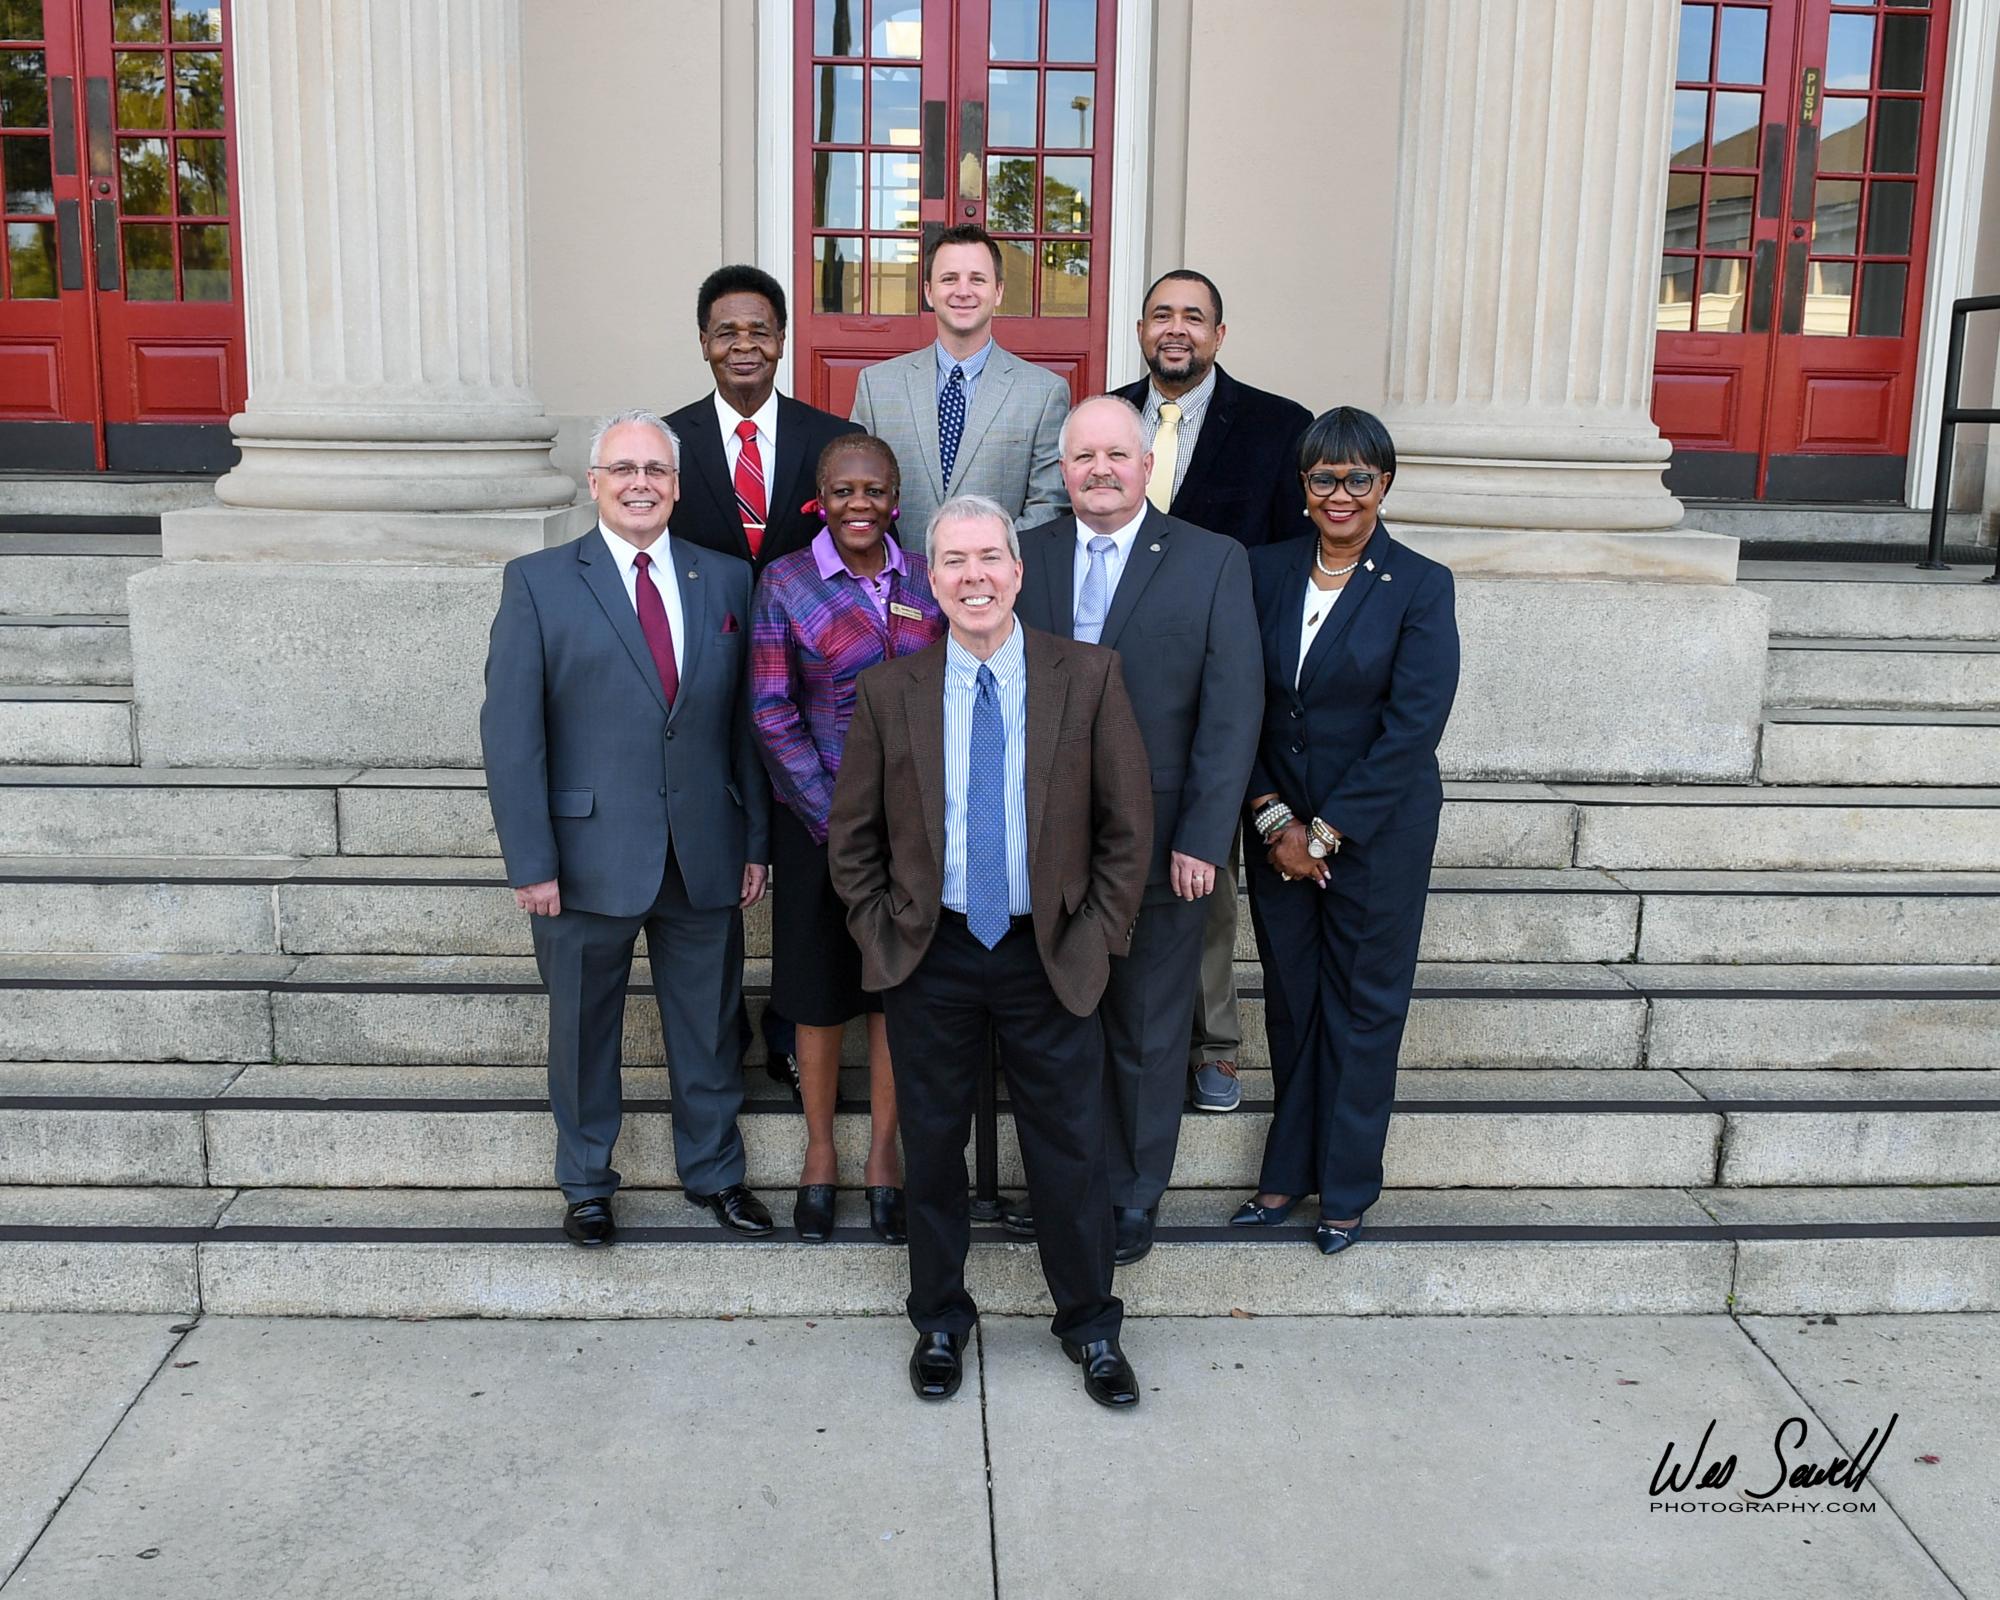 Front Row: Mayor Scott James Matheson; Middle Row: Ben Norton, Council At-Large, Sandra Tooley, District 2, Tim Carroll, District 5, Vivian Miller-Cody, Mayor Pro-Tem, District 1; Back Row: Sonny Vickers, District 3, Andy Gibbs, District 6, Eric Howard, District 4.